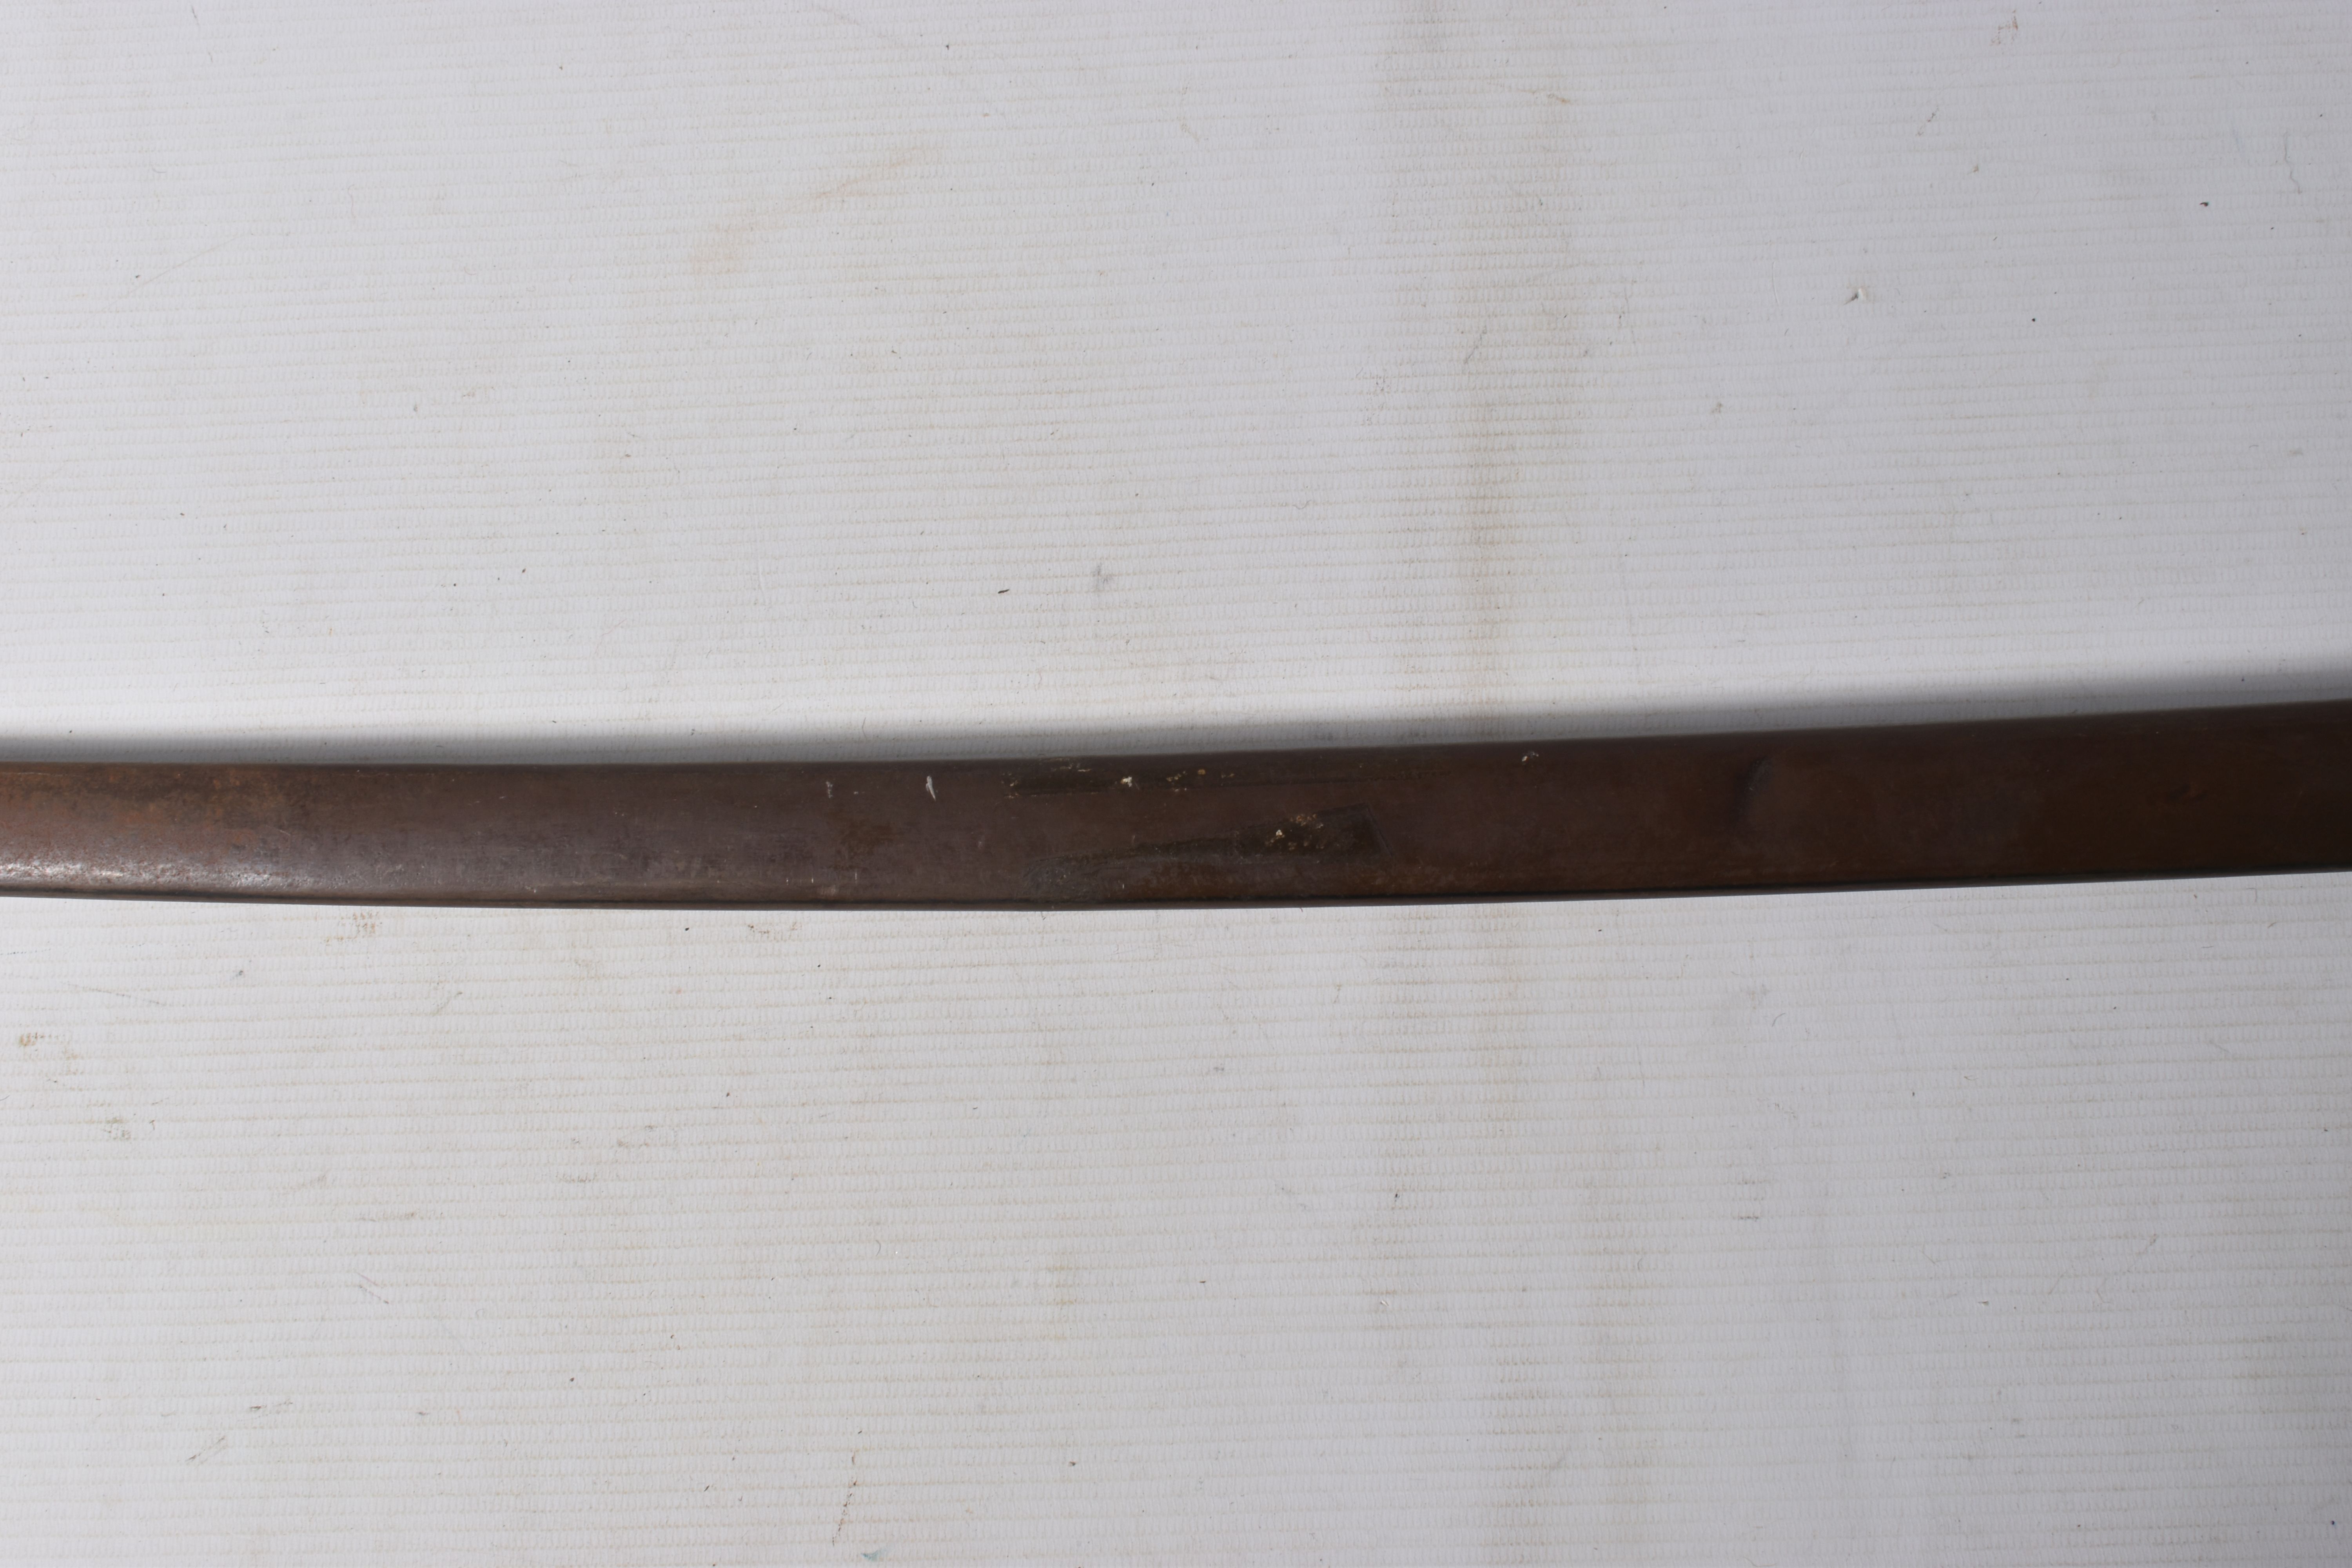 A JAPANESE TYPE 32 OTSU SABRE, the blade has no markings but has the serial number 60866 at the - Image 6 of 29